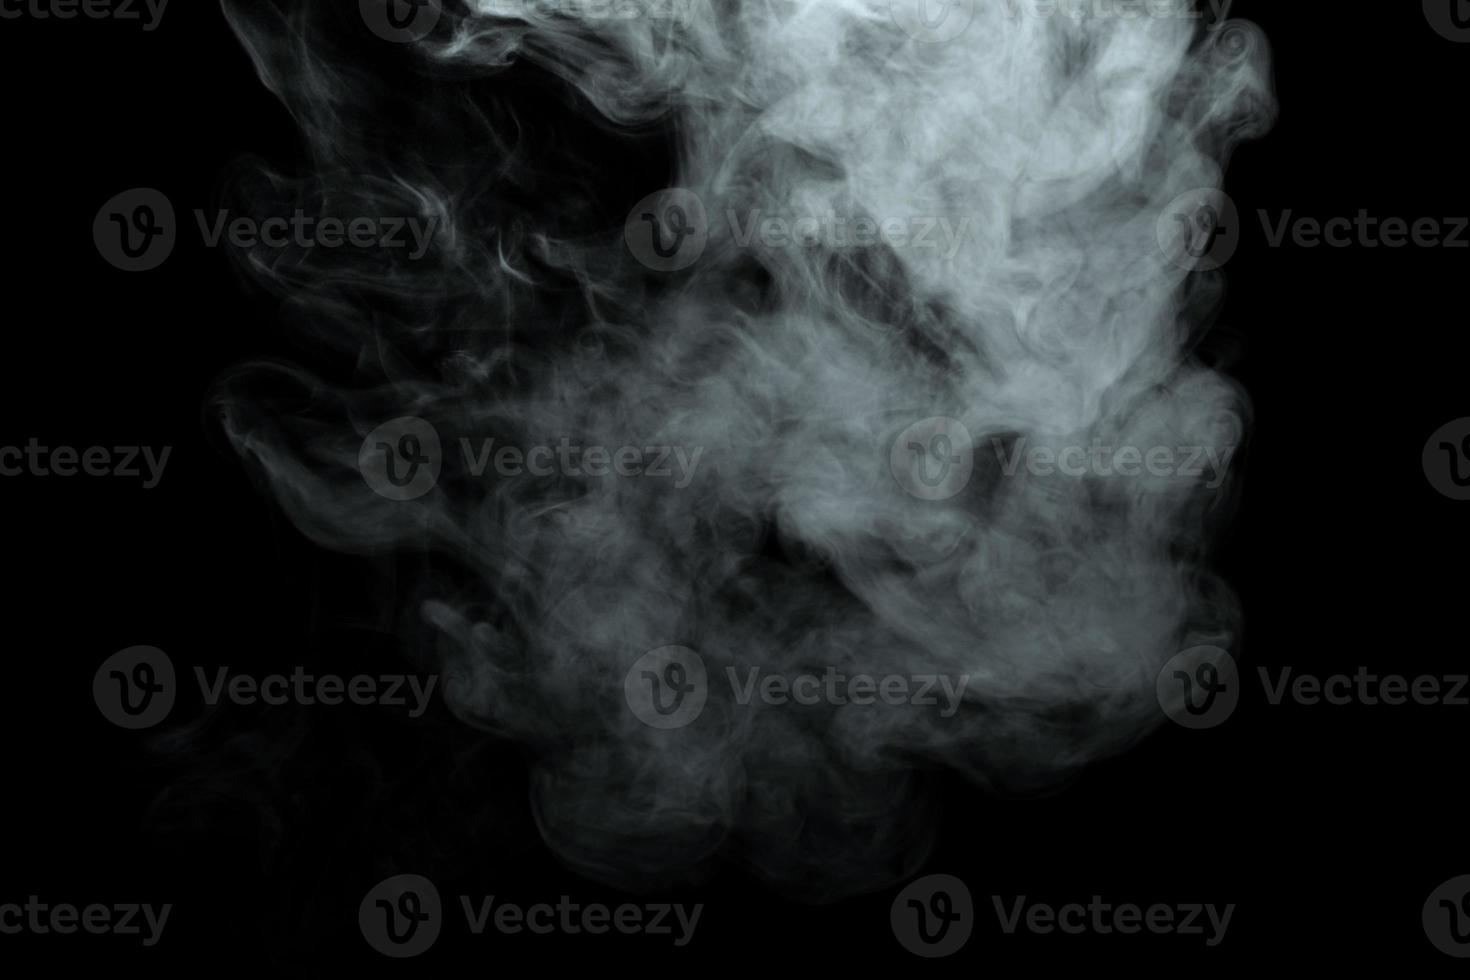 Abstract powder or smoke isolated on black background photo